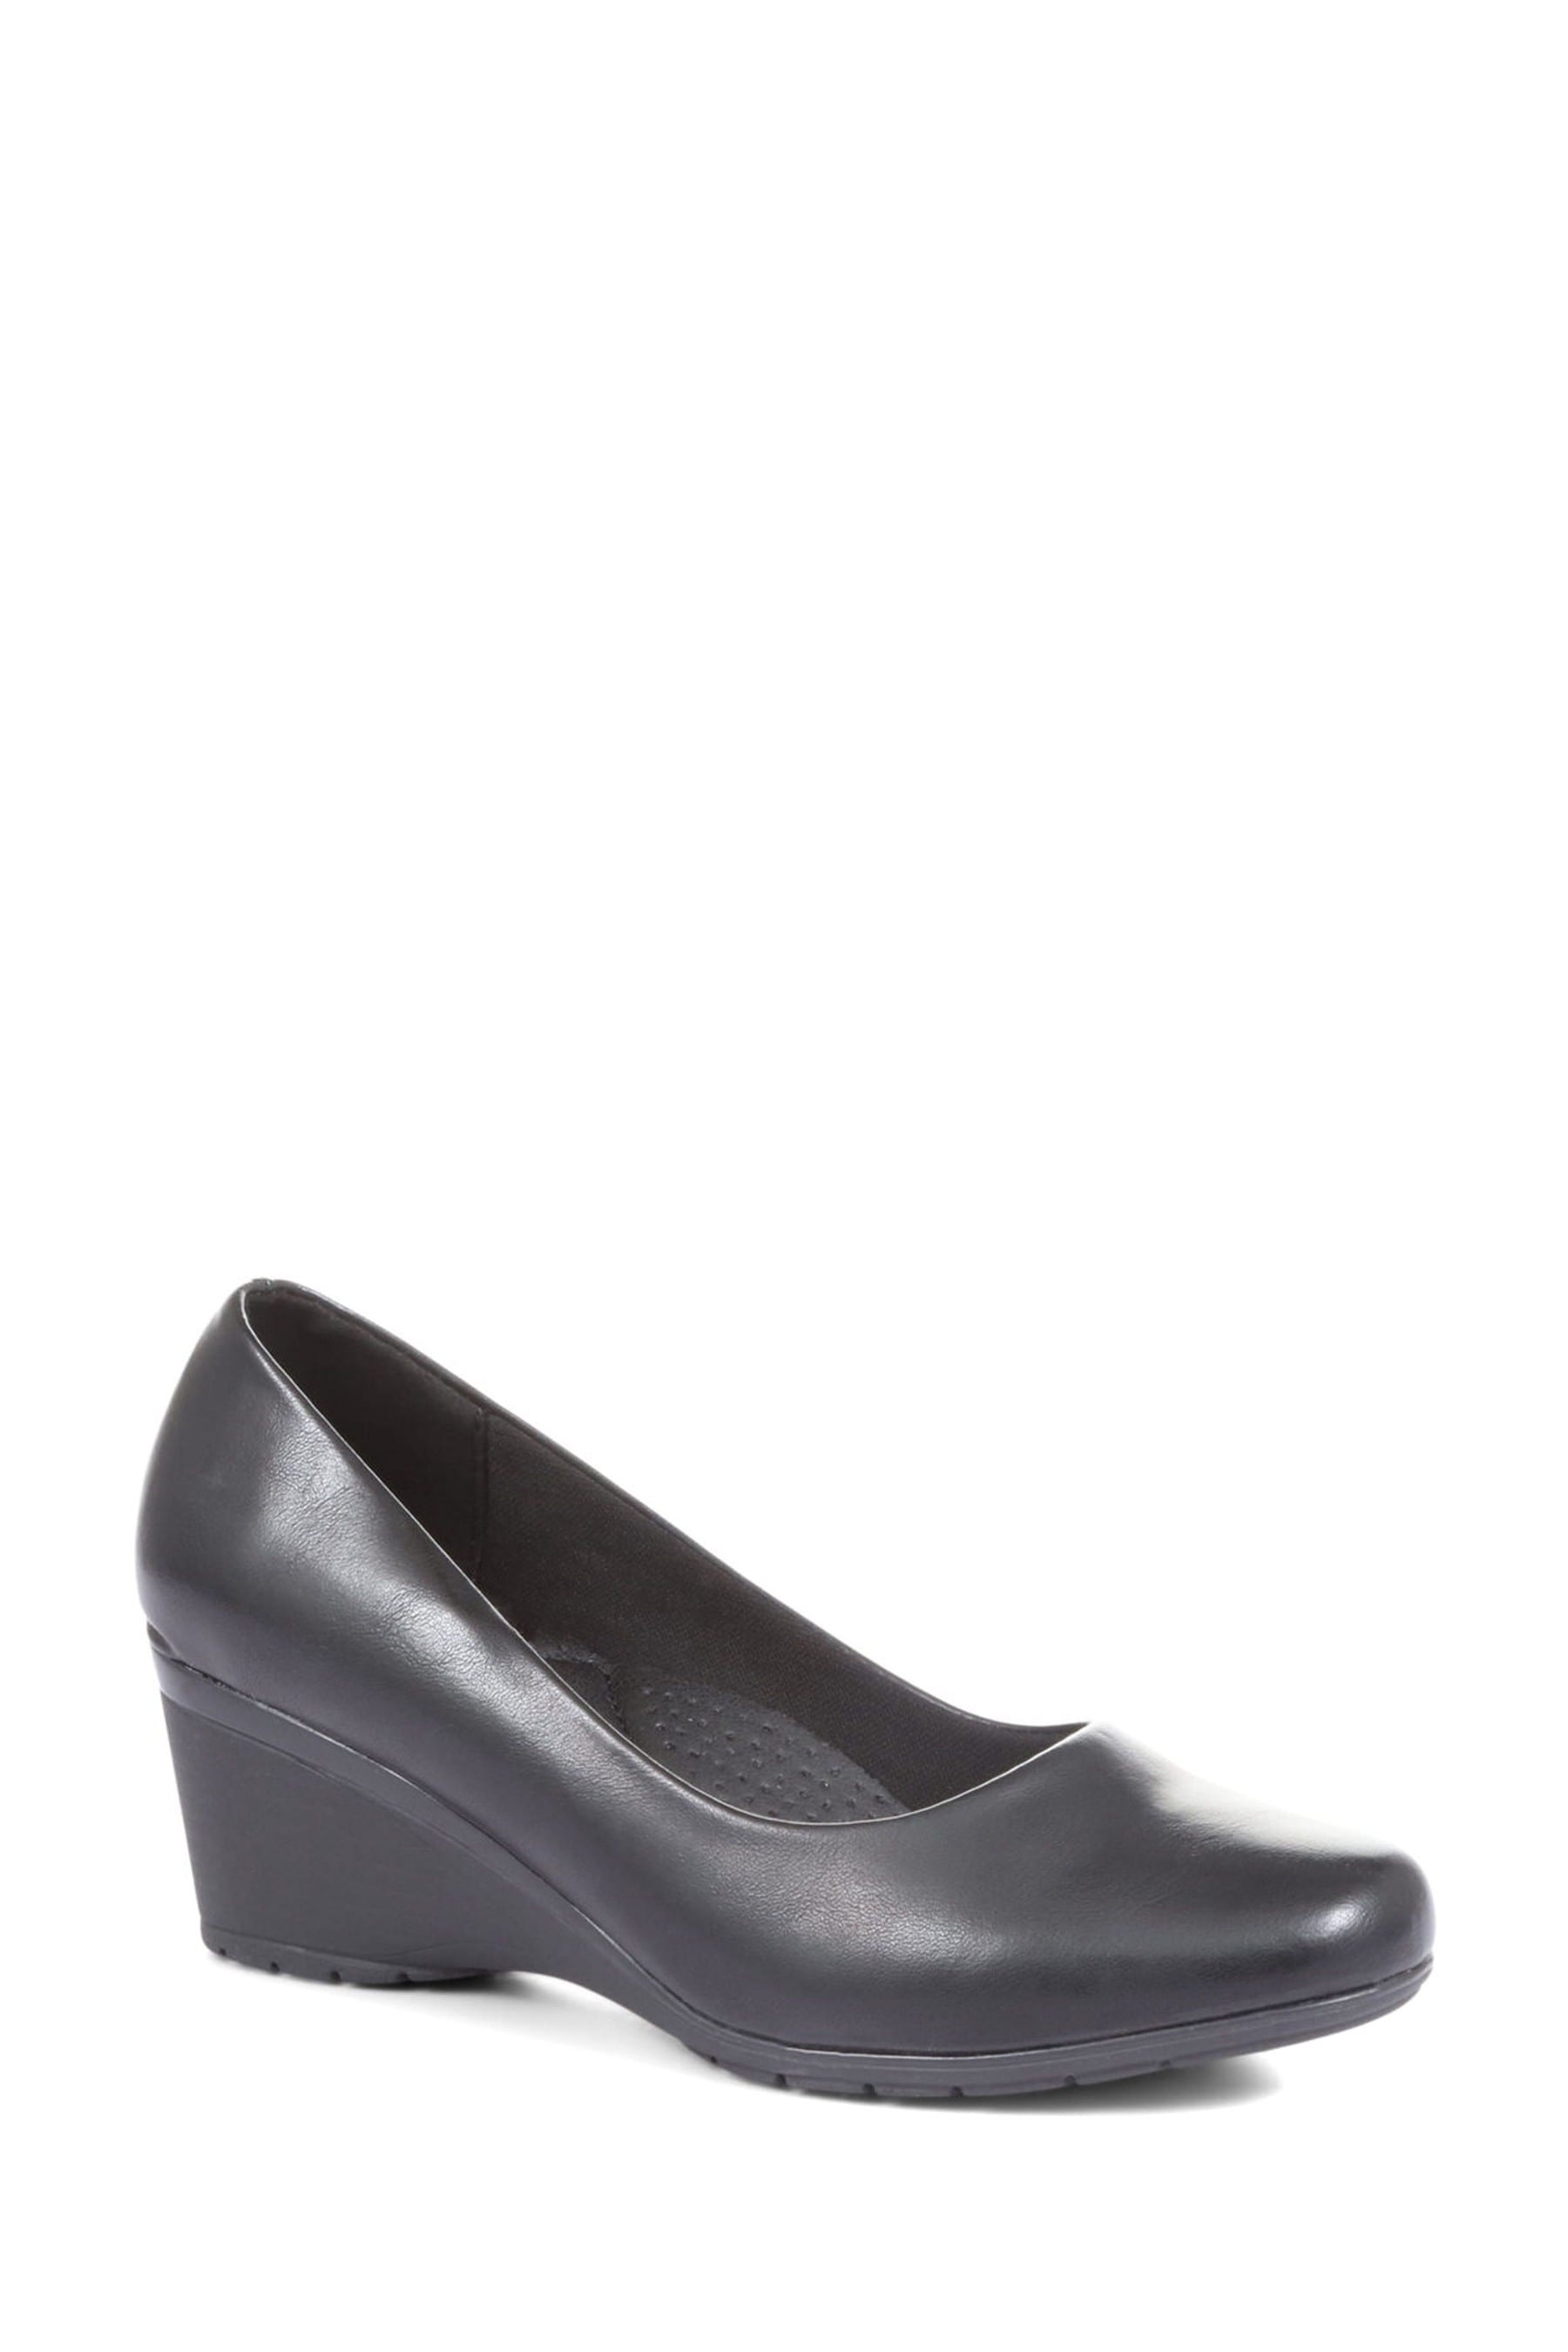 Buy Pavers Black Faux Leather Wedge Pumps from the Next UK online shop